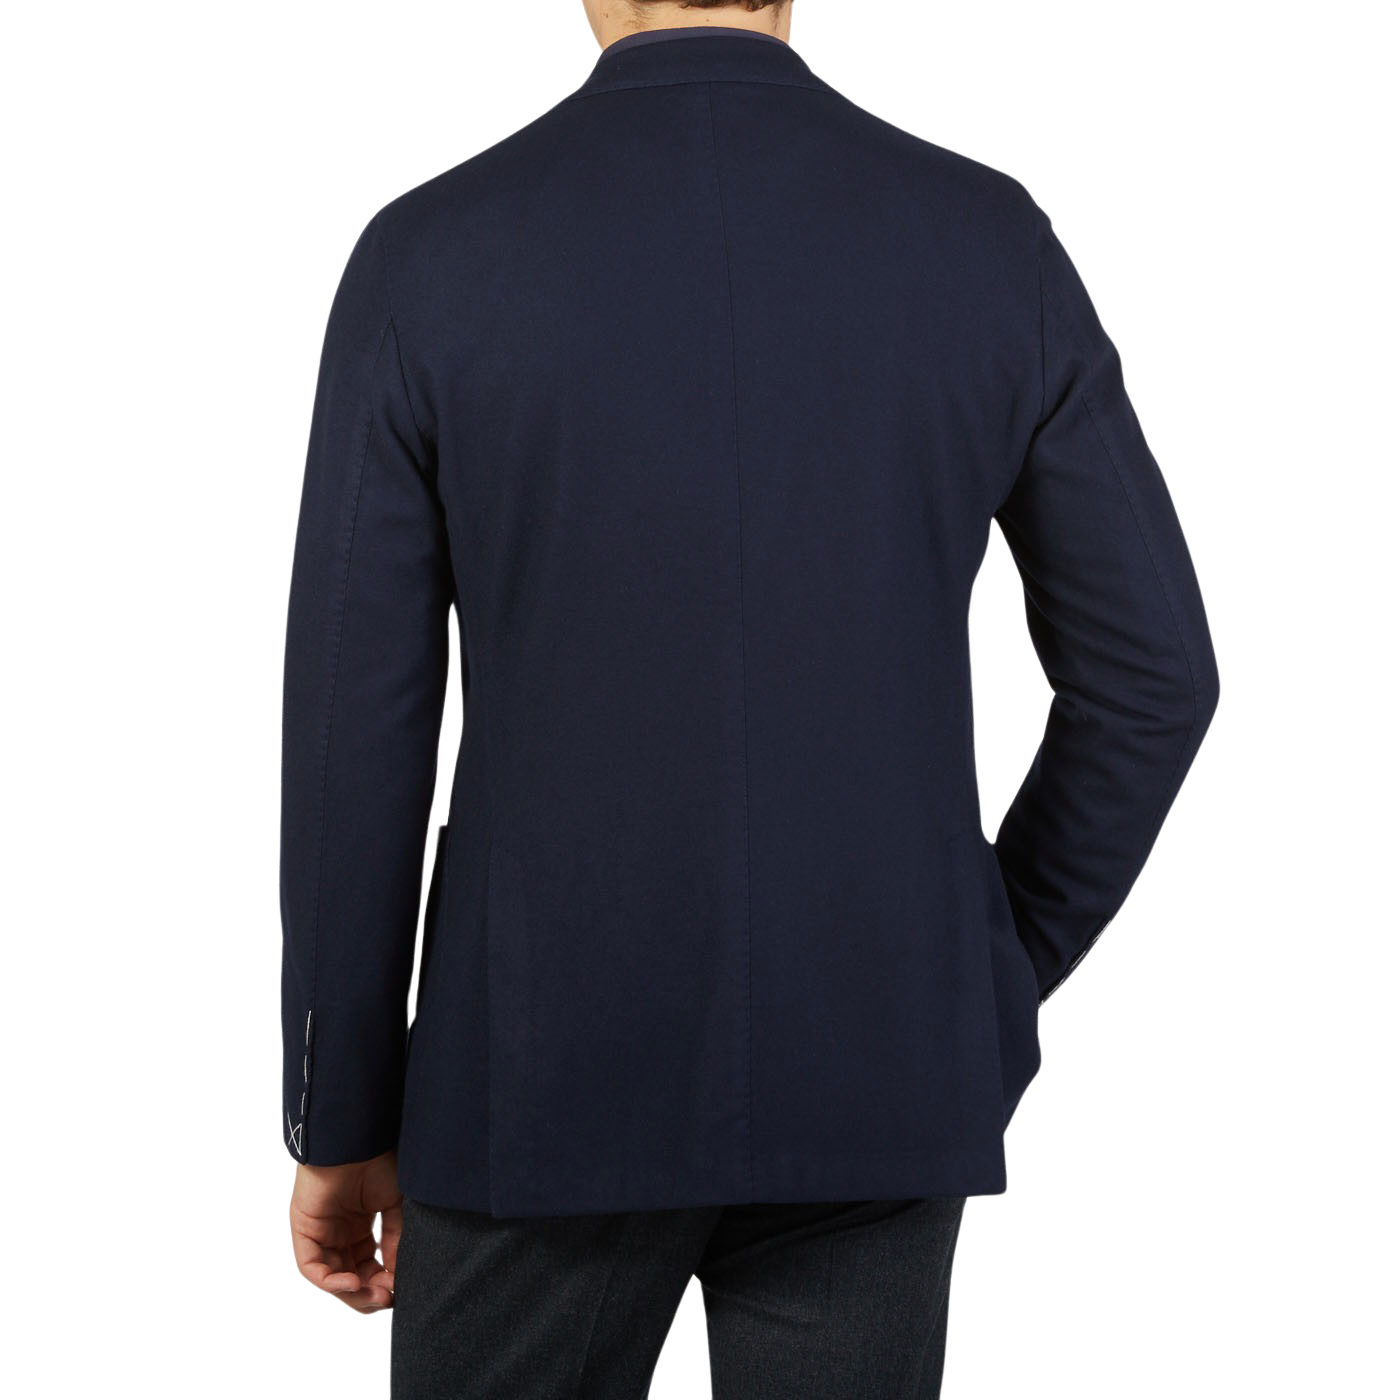 The back view of a man wearing a Boglioli Navy Blue Brushed Wool K Jacket.